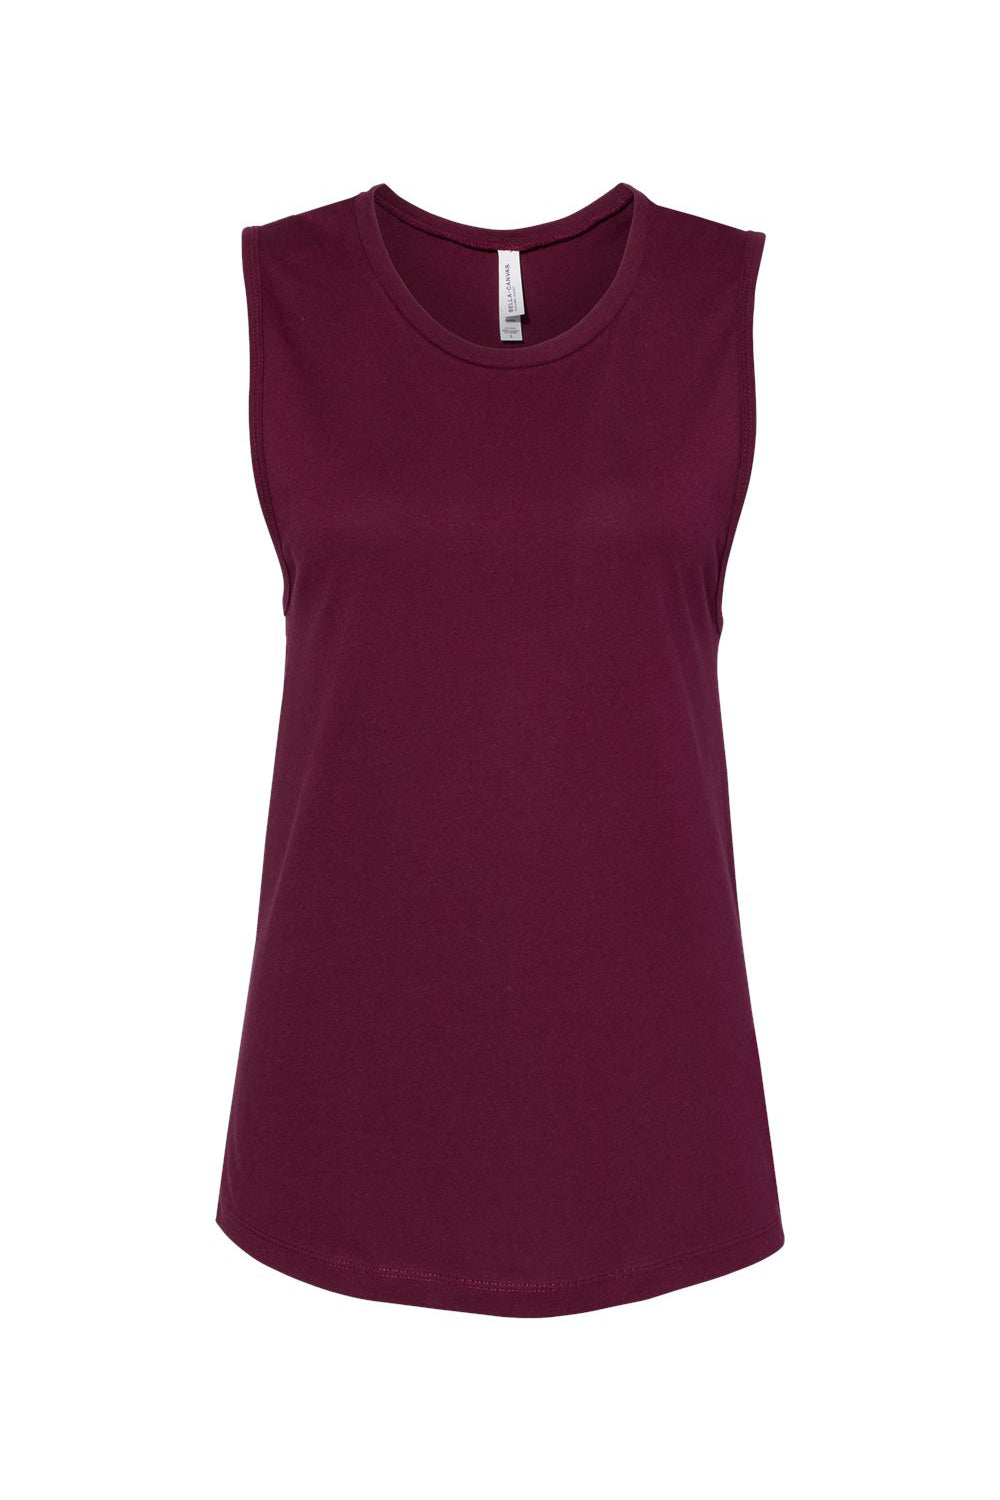 Bella + Canvas BC6003/B6003/6003 Womens Jersey Muscle Tank Top Maroon Flat Front